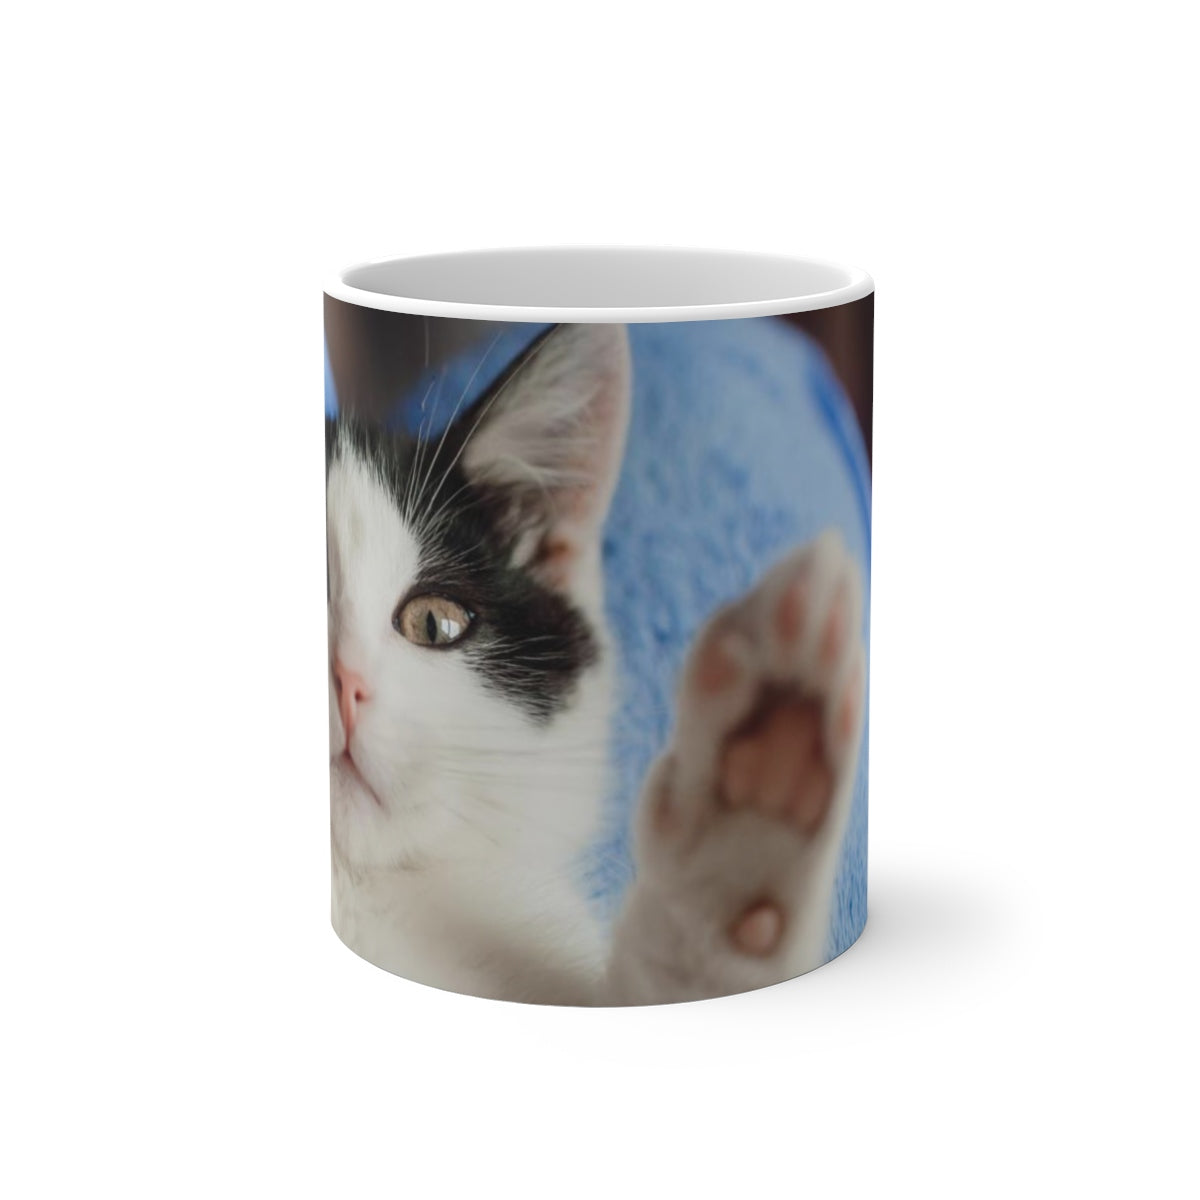 Color Changing Mug, Custom Photo Magic Mug, Heat Change Unique Personalized Gift for Him Her Friend Family Cat Dog Baby Mom Dad Gift of Love Starcove Fashion